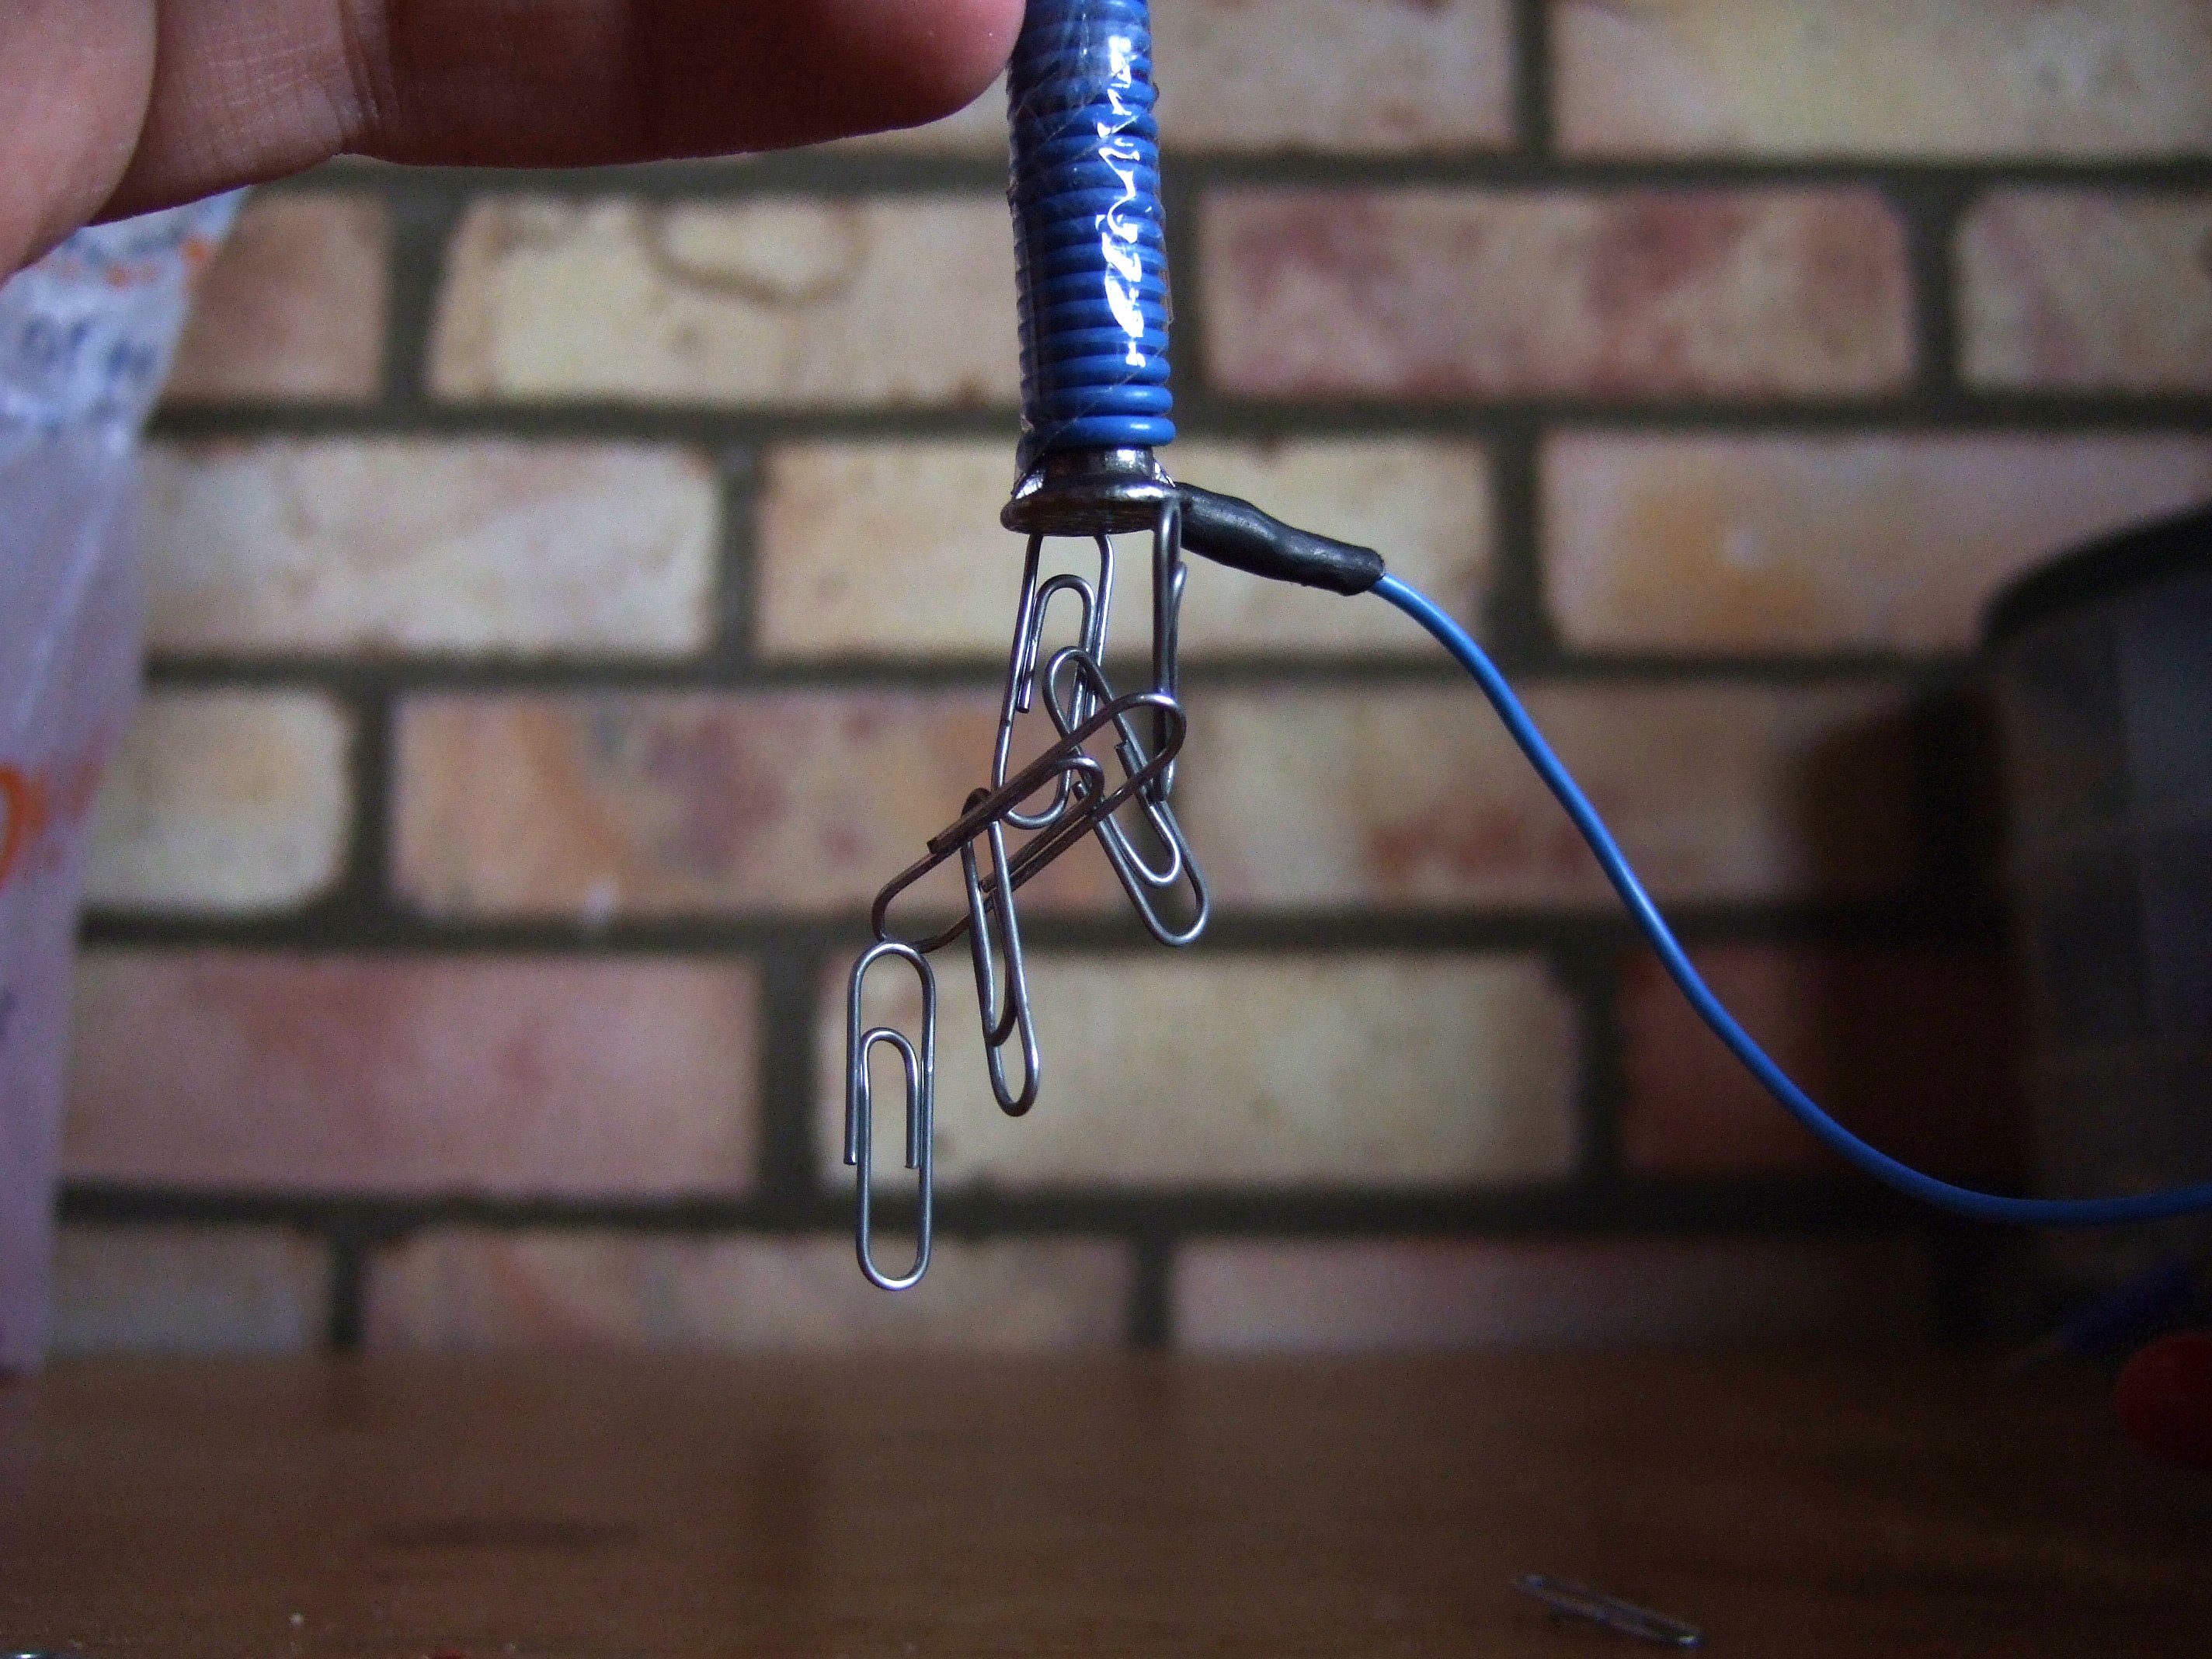 When the electromagnet is on it will pick up paperclips